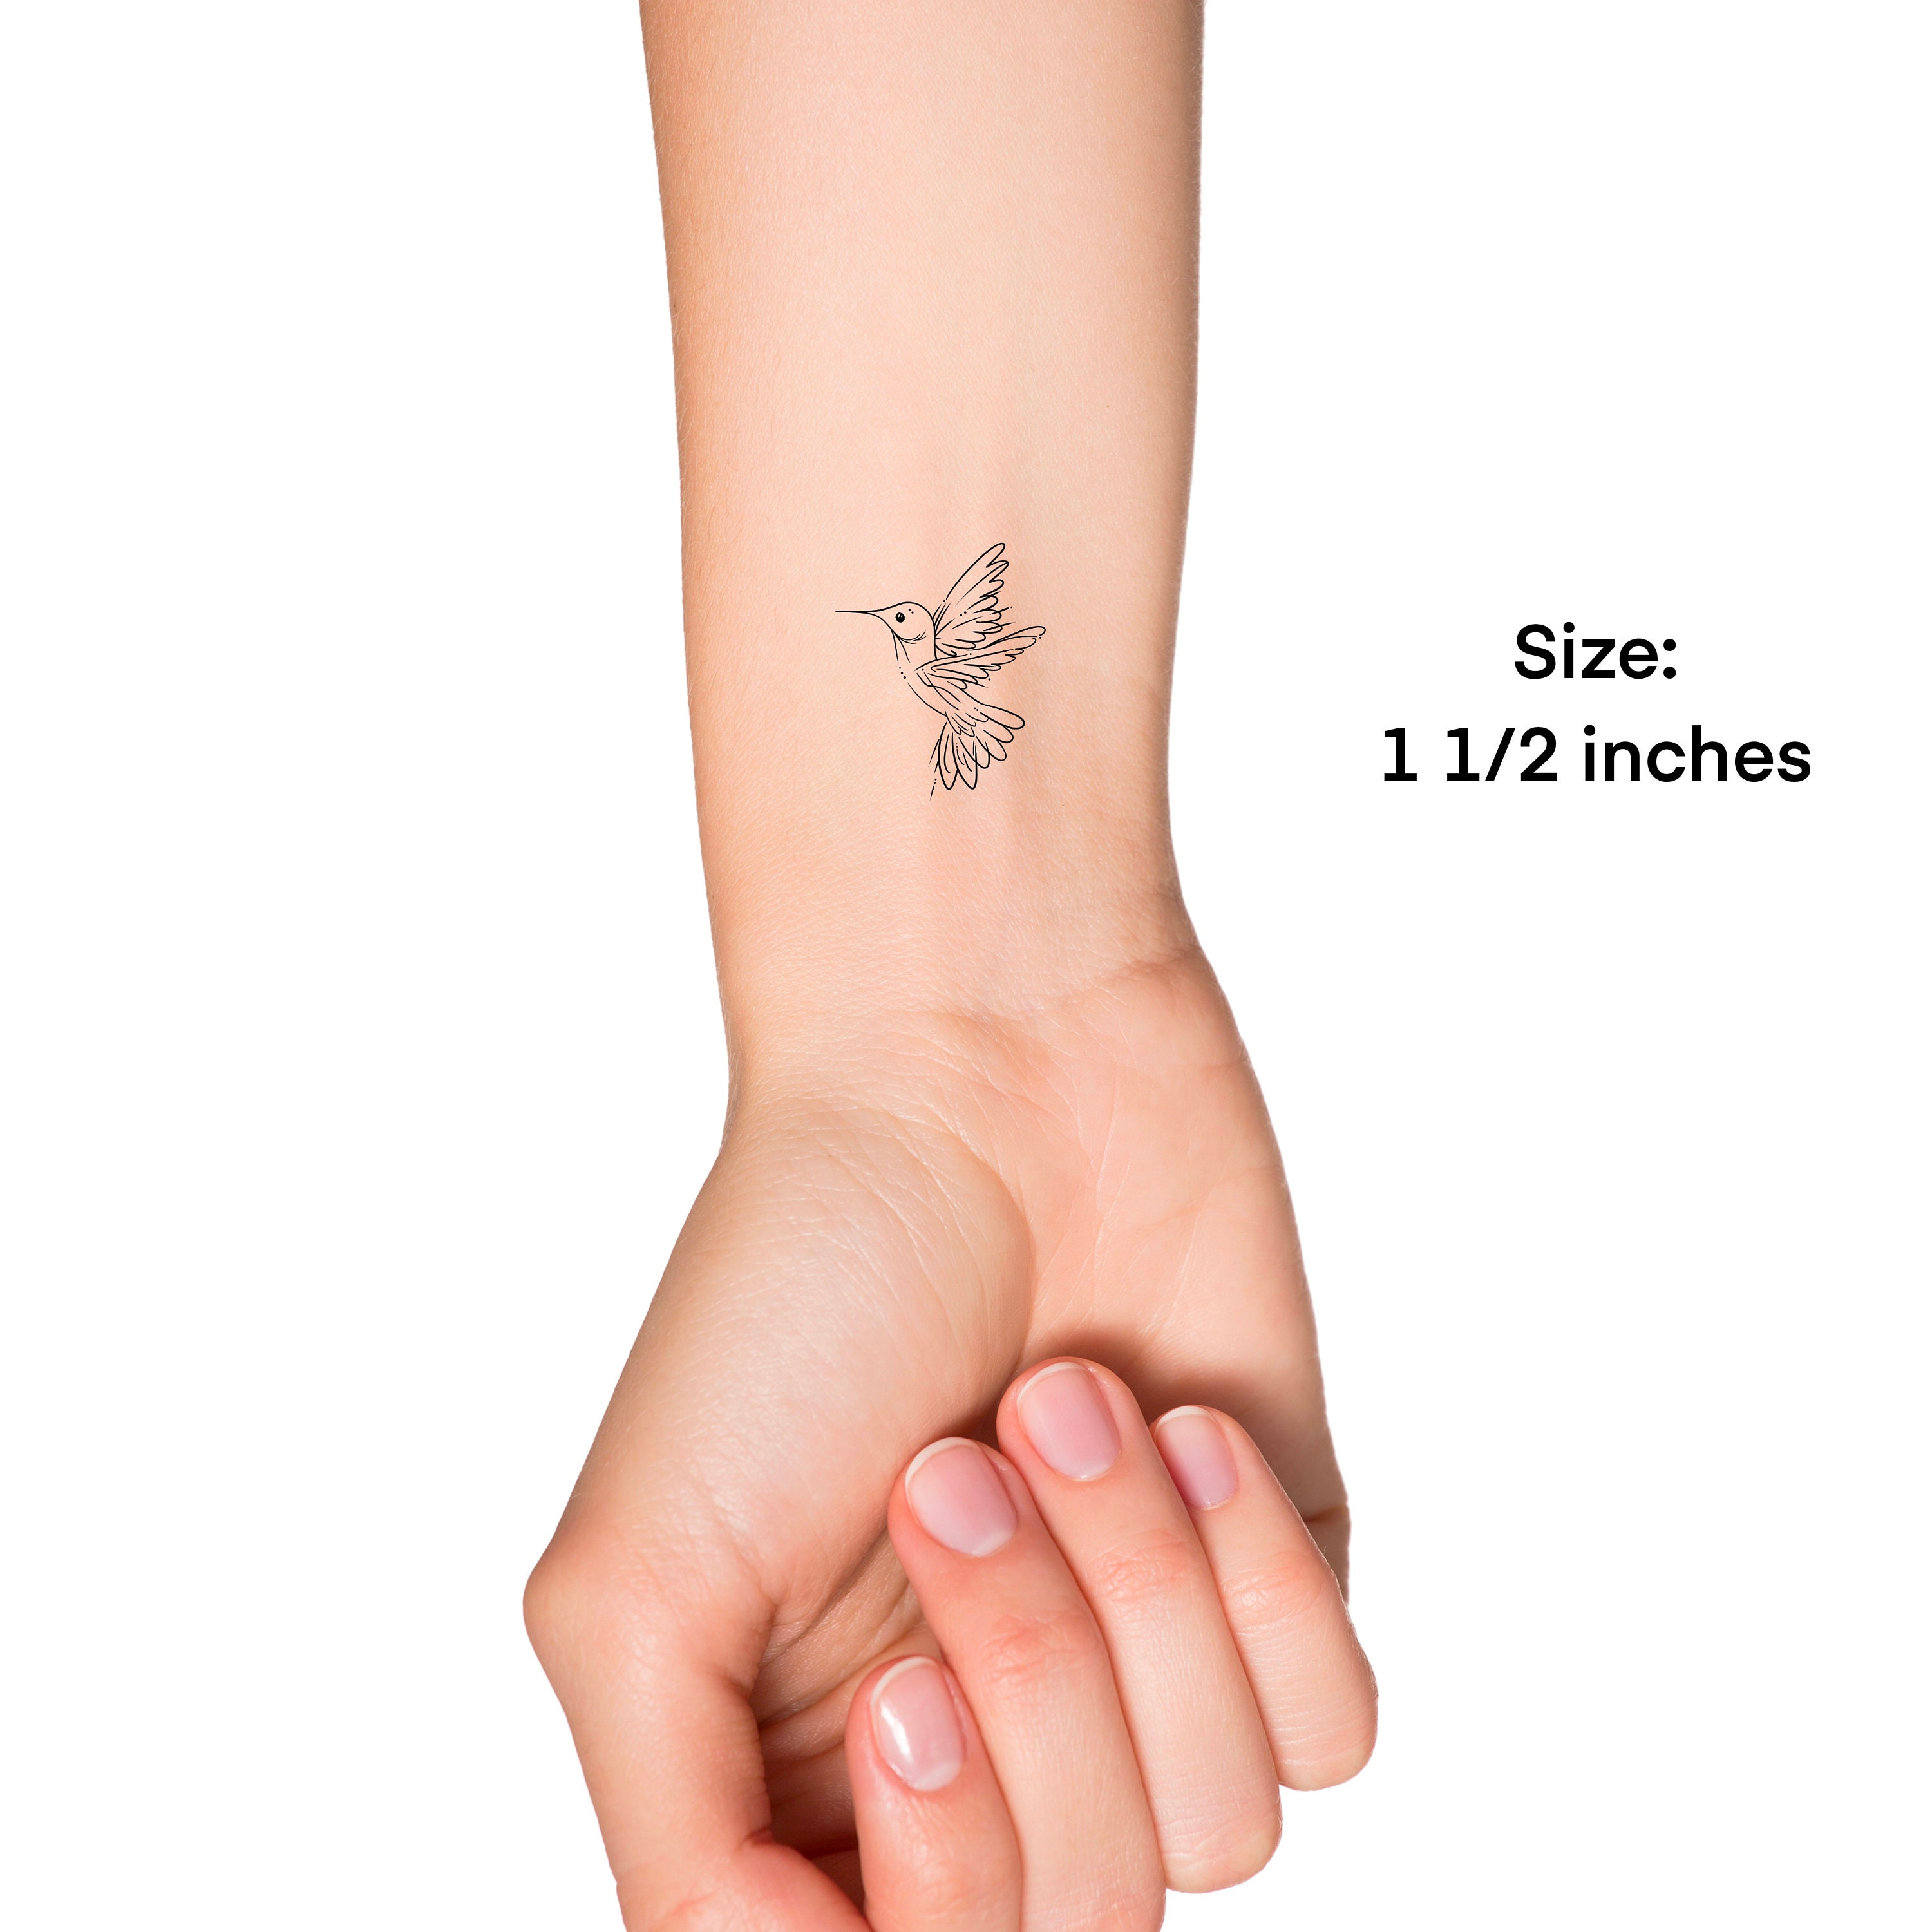 Design small tattoos for you by Zenithastrid | Fiverr